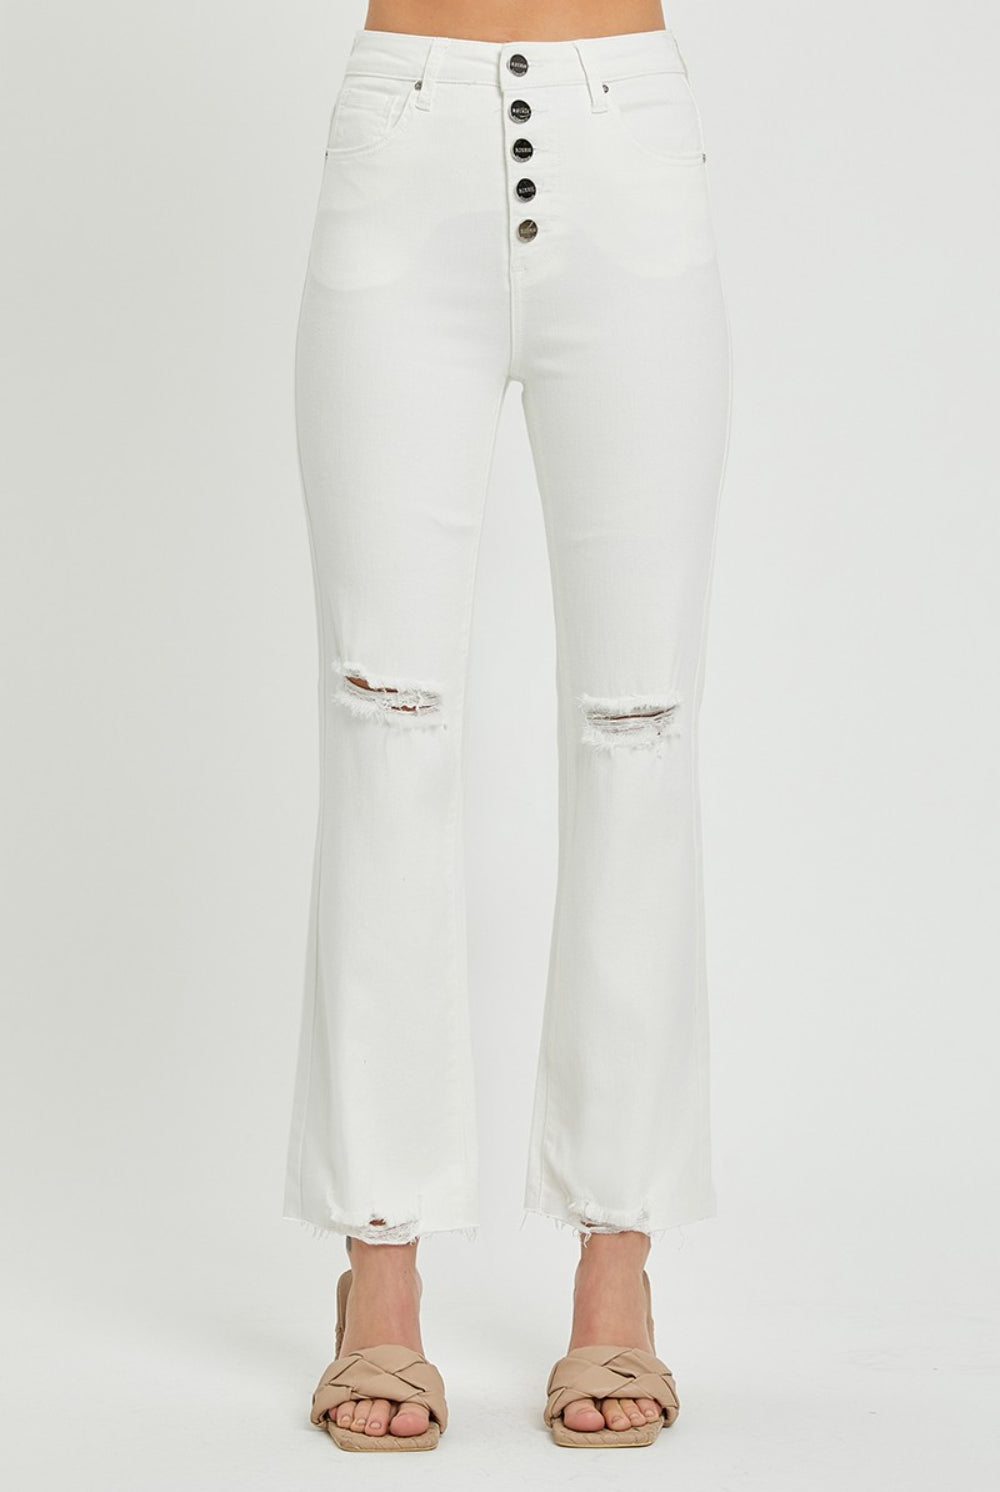 Model wearing GemThreads Boutique Distressed High-Rise Bootcut Jeans in white.